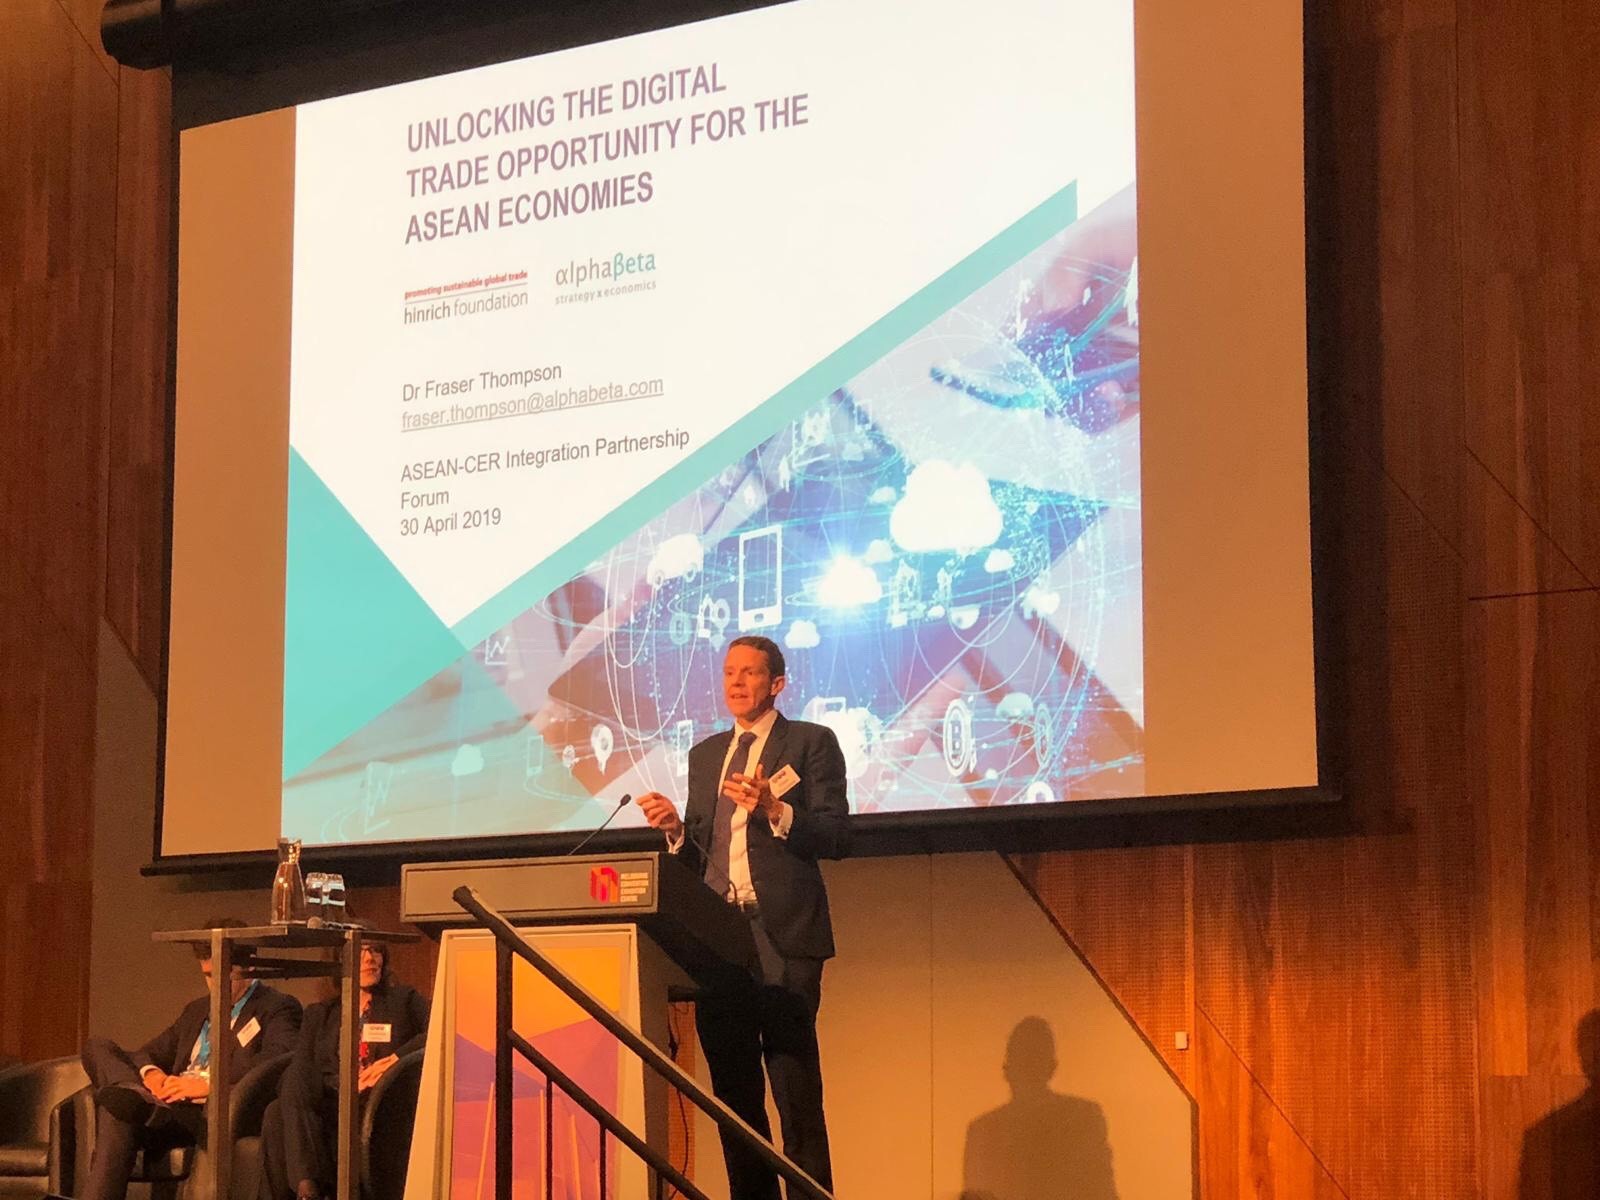 The value of Digital Trade to ASEAN, Australia and New Zealand